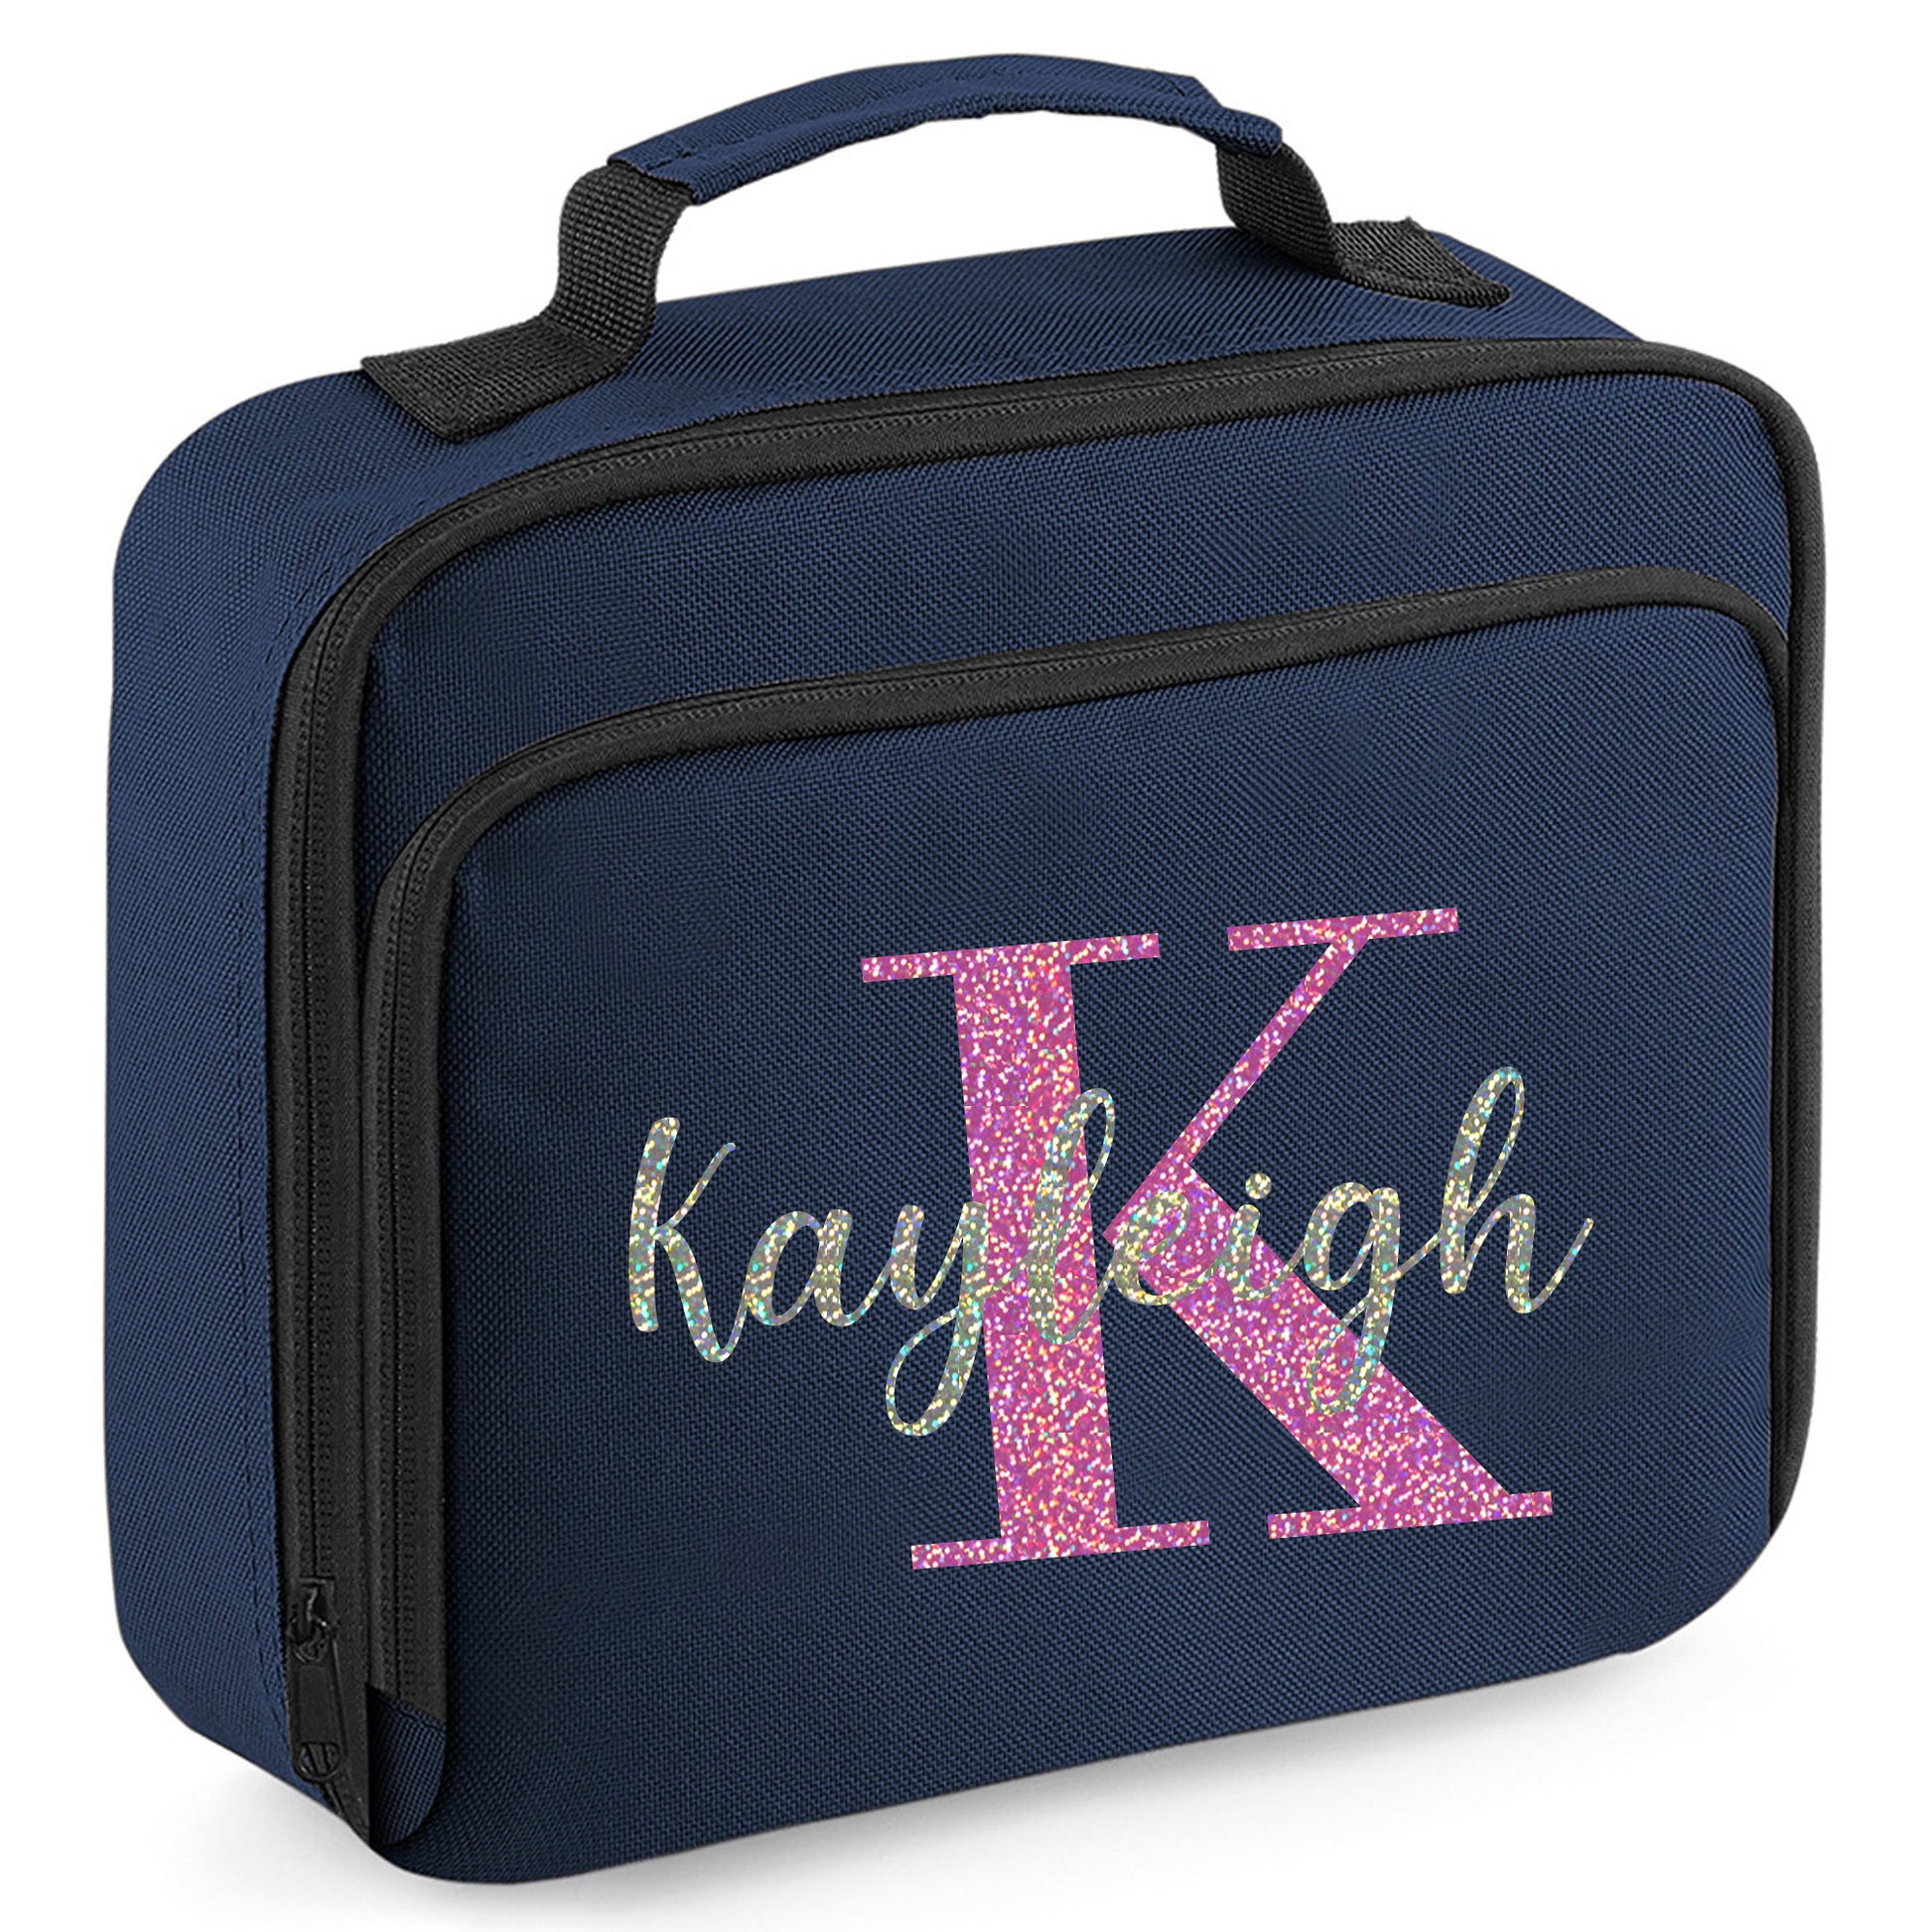 Personalised Lunch Bag with Name Childs School Lunch Box  - Always Looking Good - Navy  